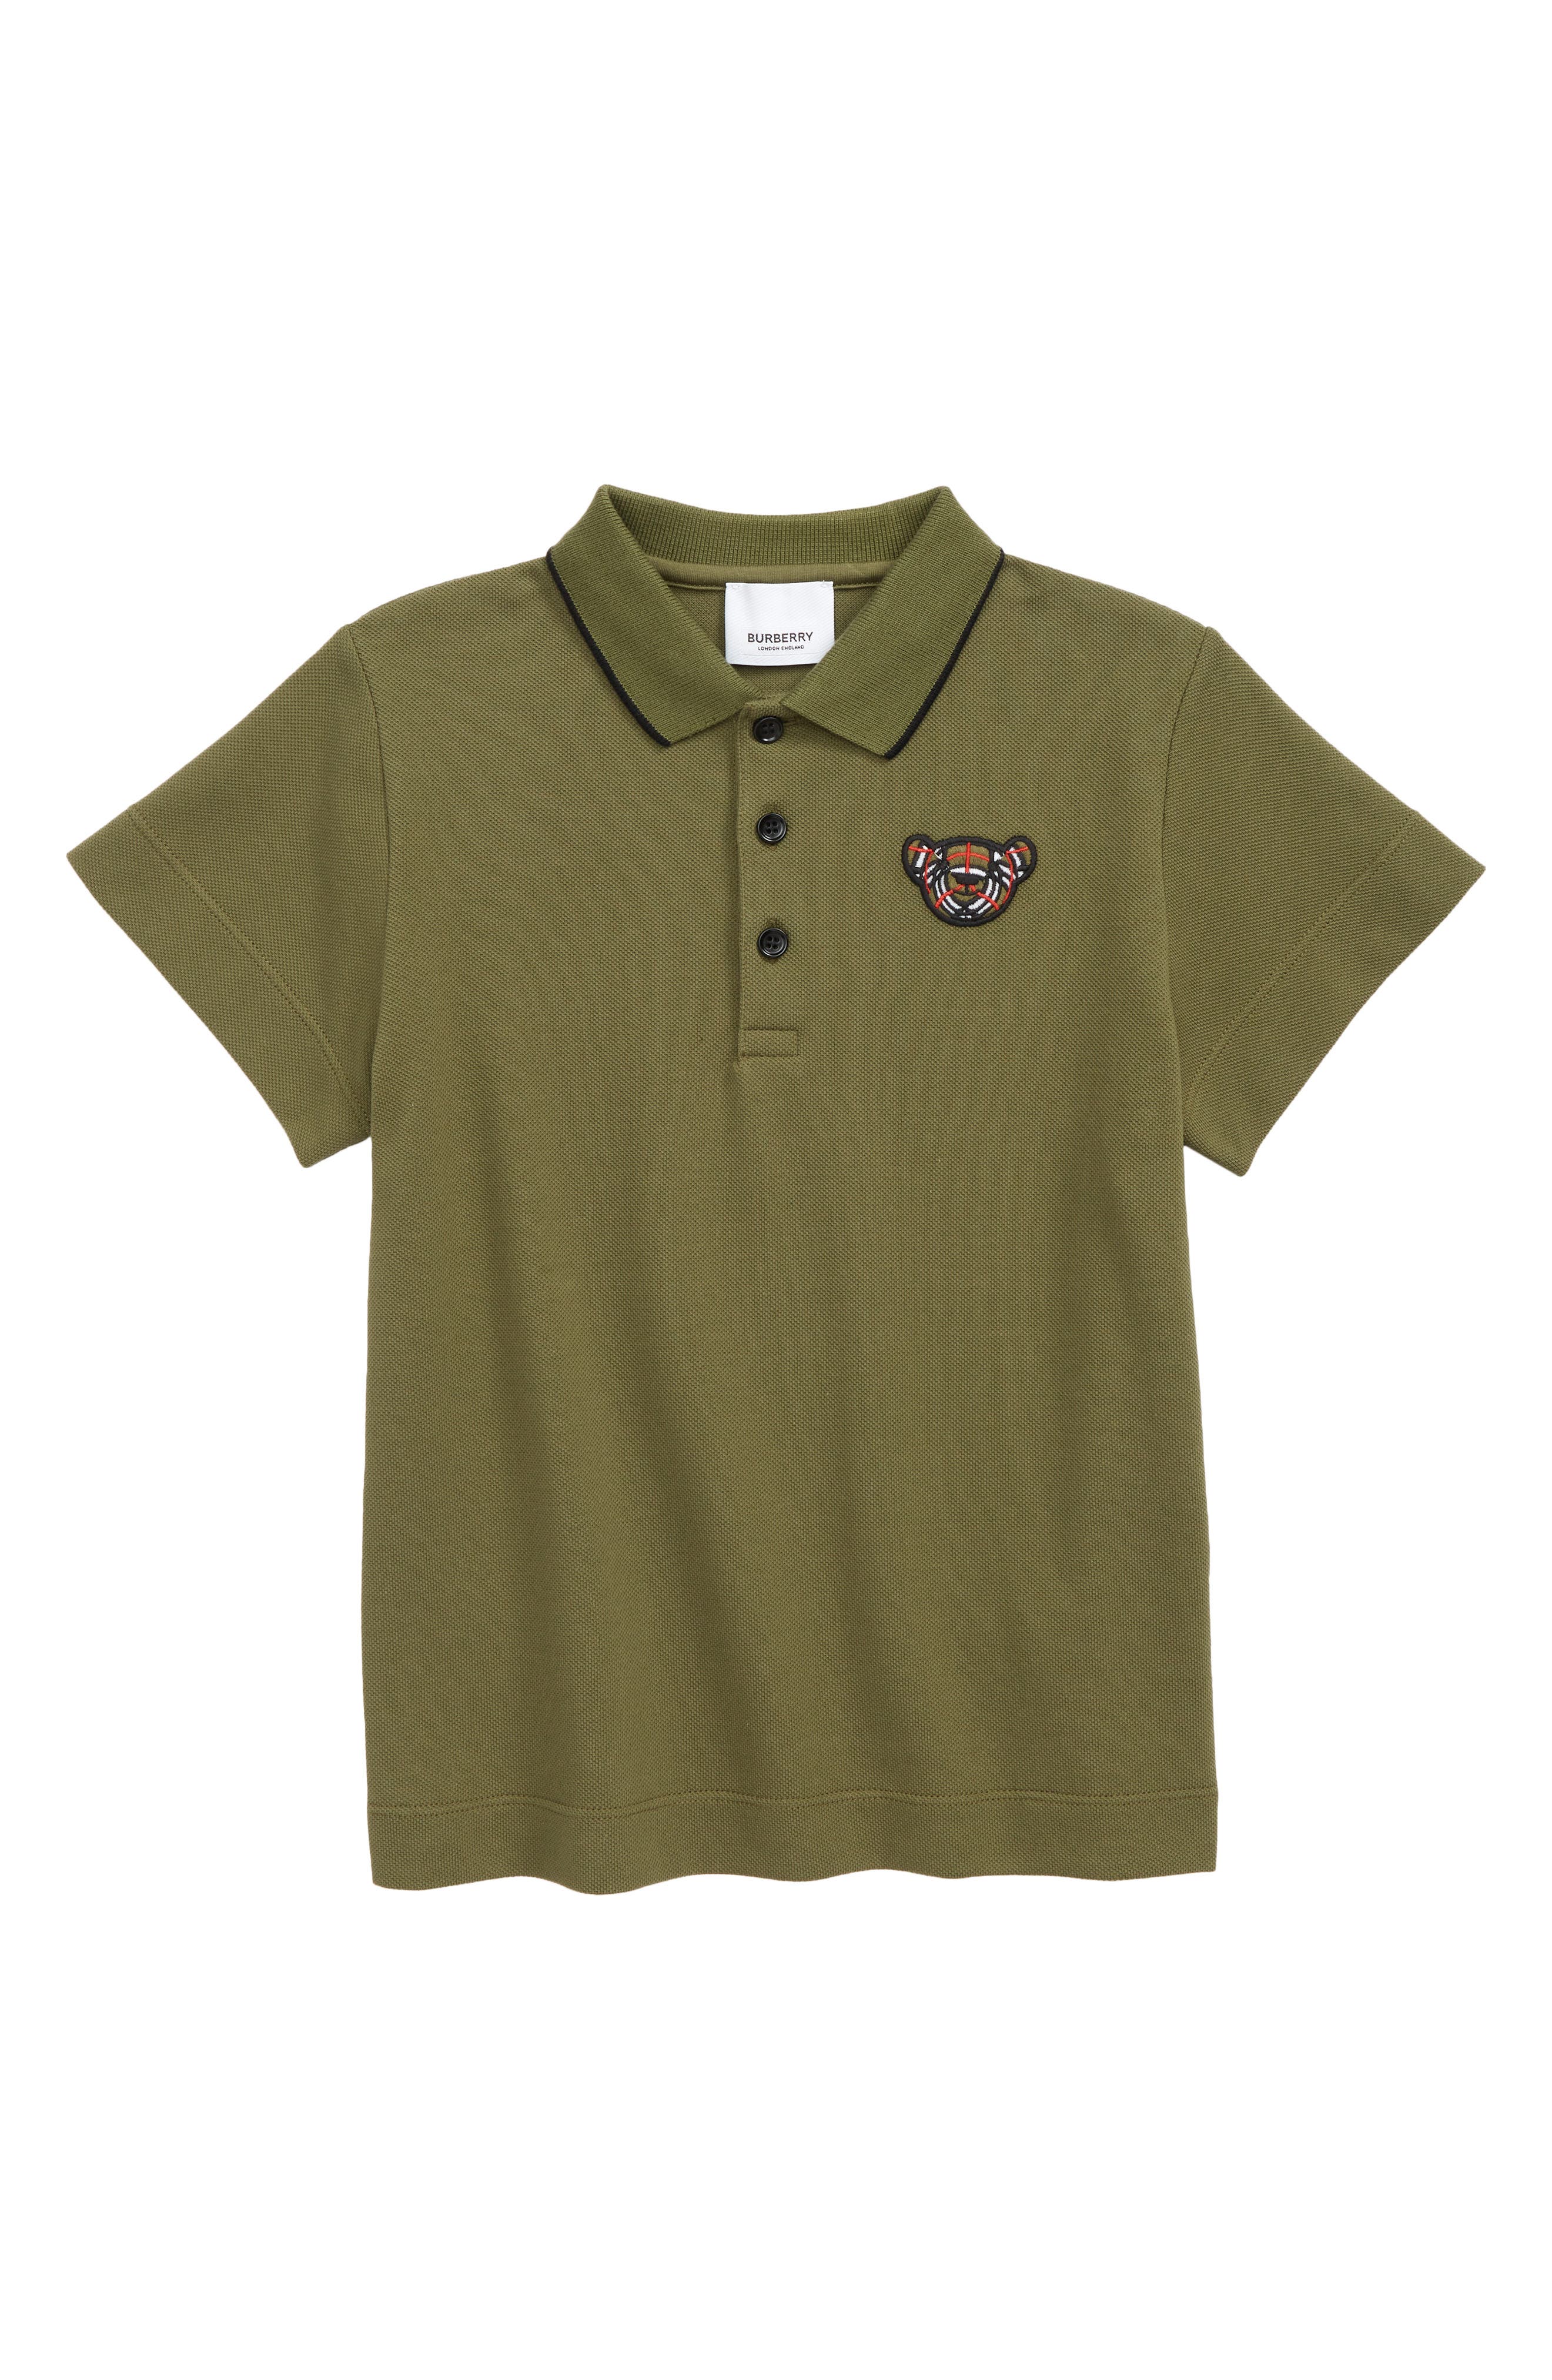 Burberry Kids' Hecter Thomas Bear Cotton Pique Polo in Caper Green at Nordstrom, Size 8Y Us